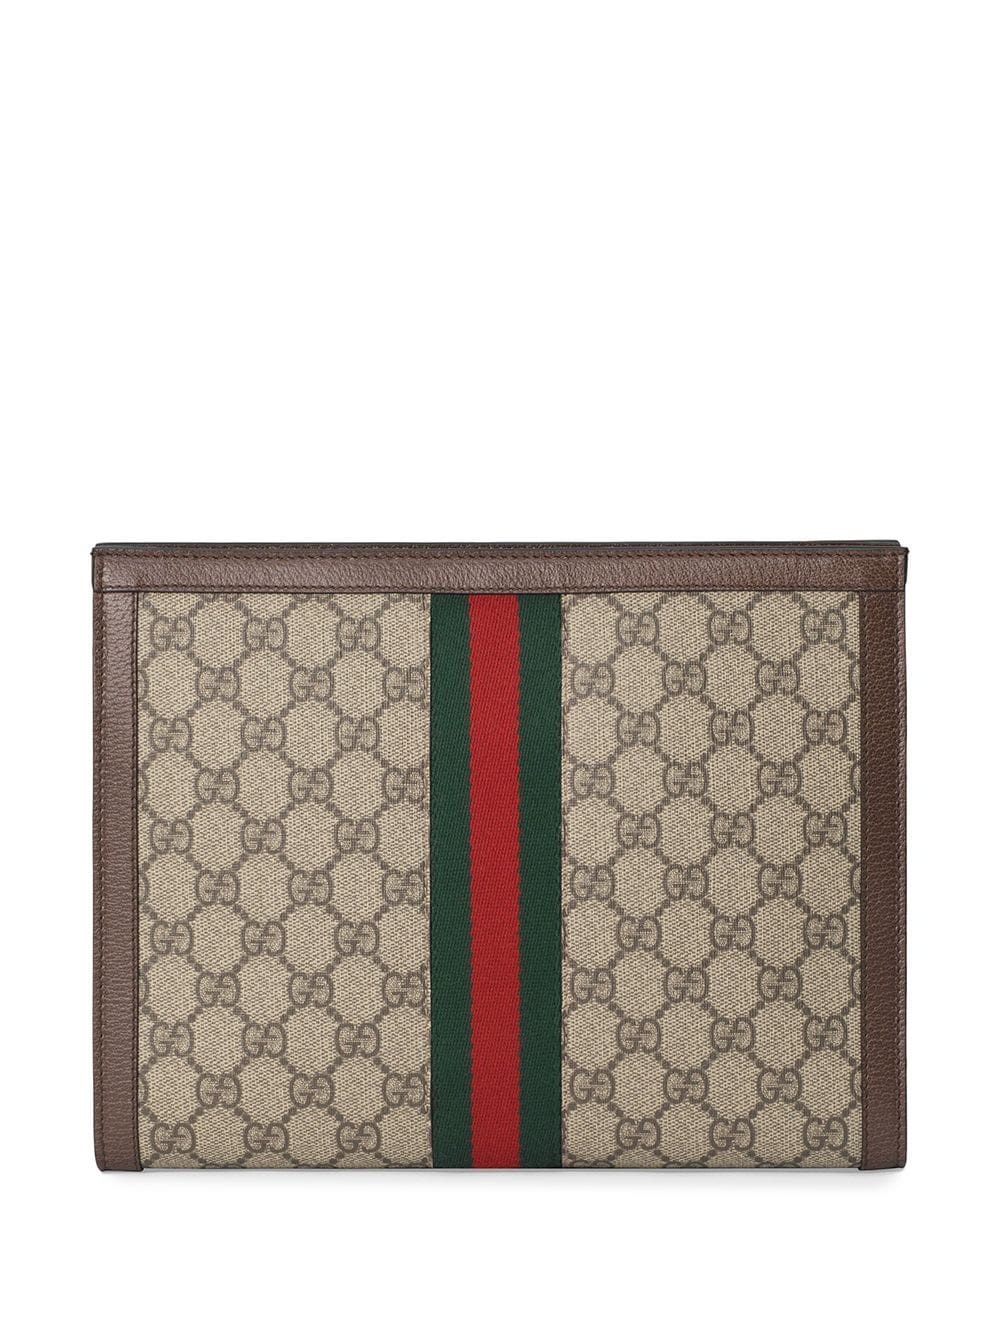 Gucci Ophidia Clutch Bag for Men